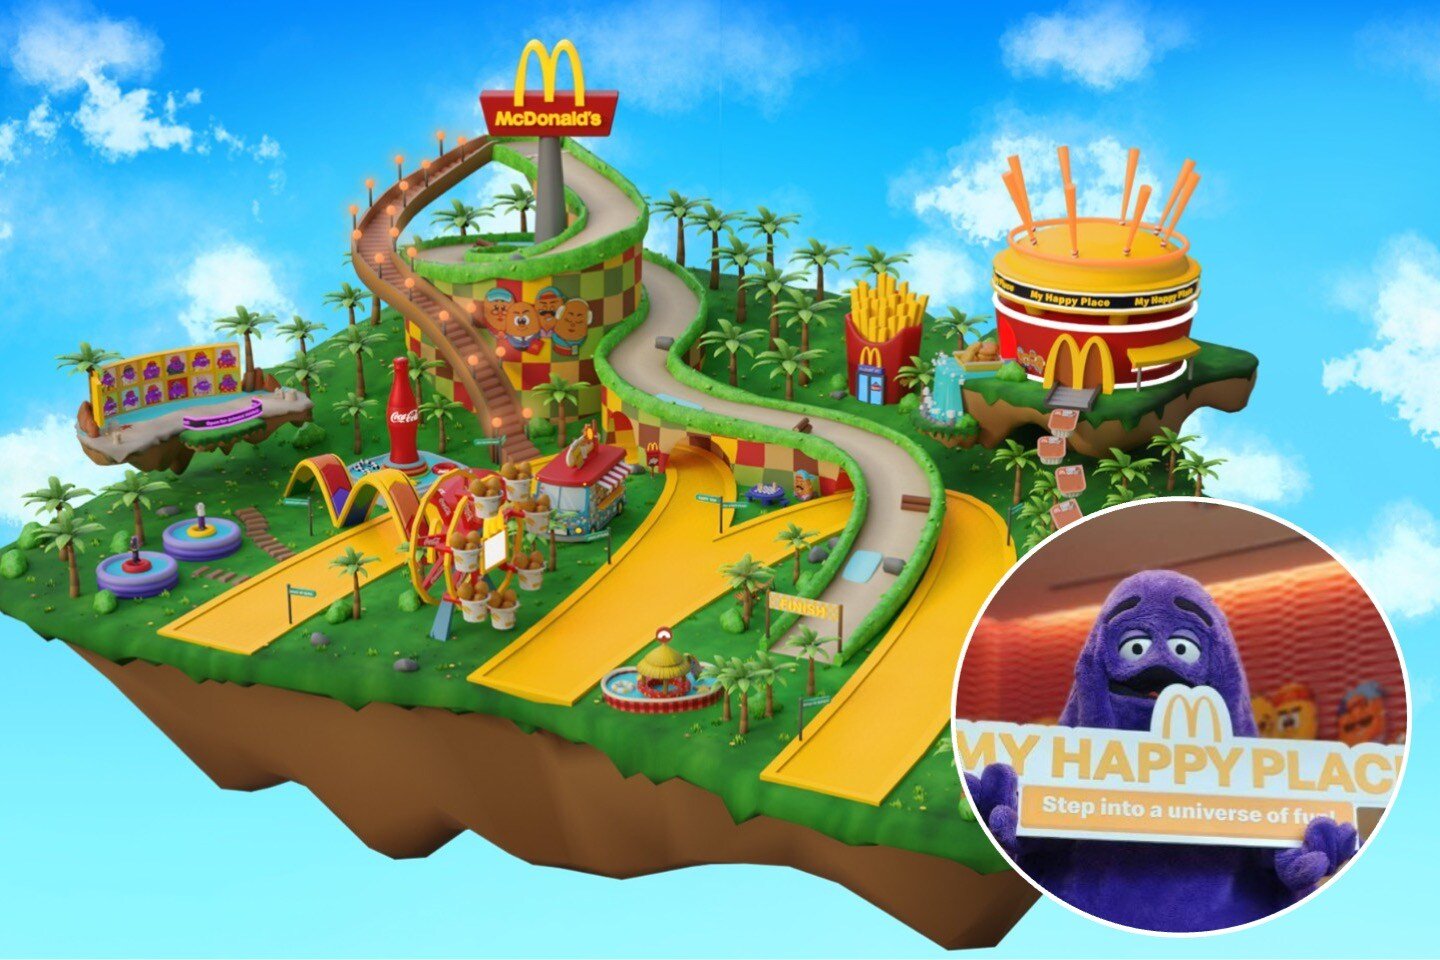 McDonald’s new metaverse shown as a floating island with Grimace in the foreground 